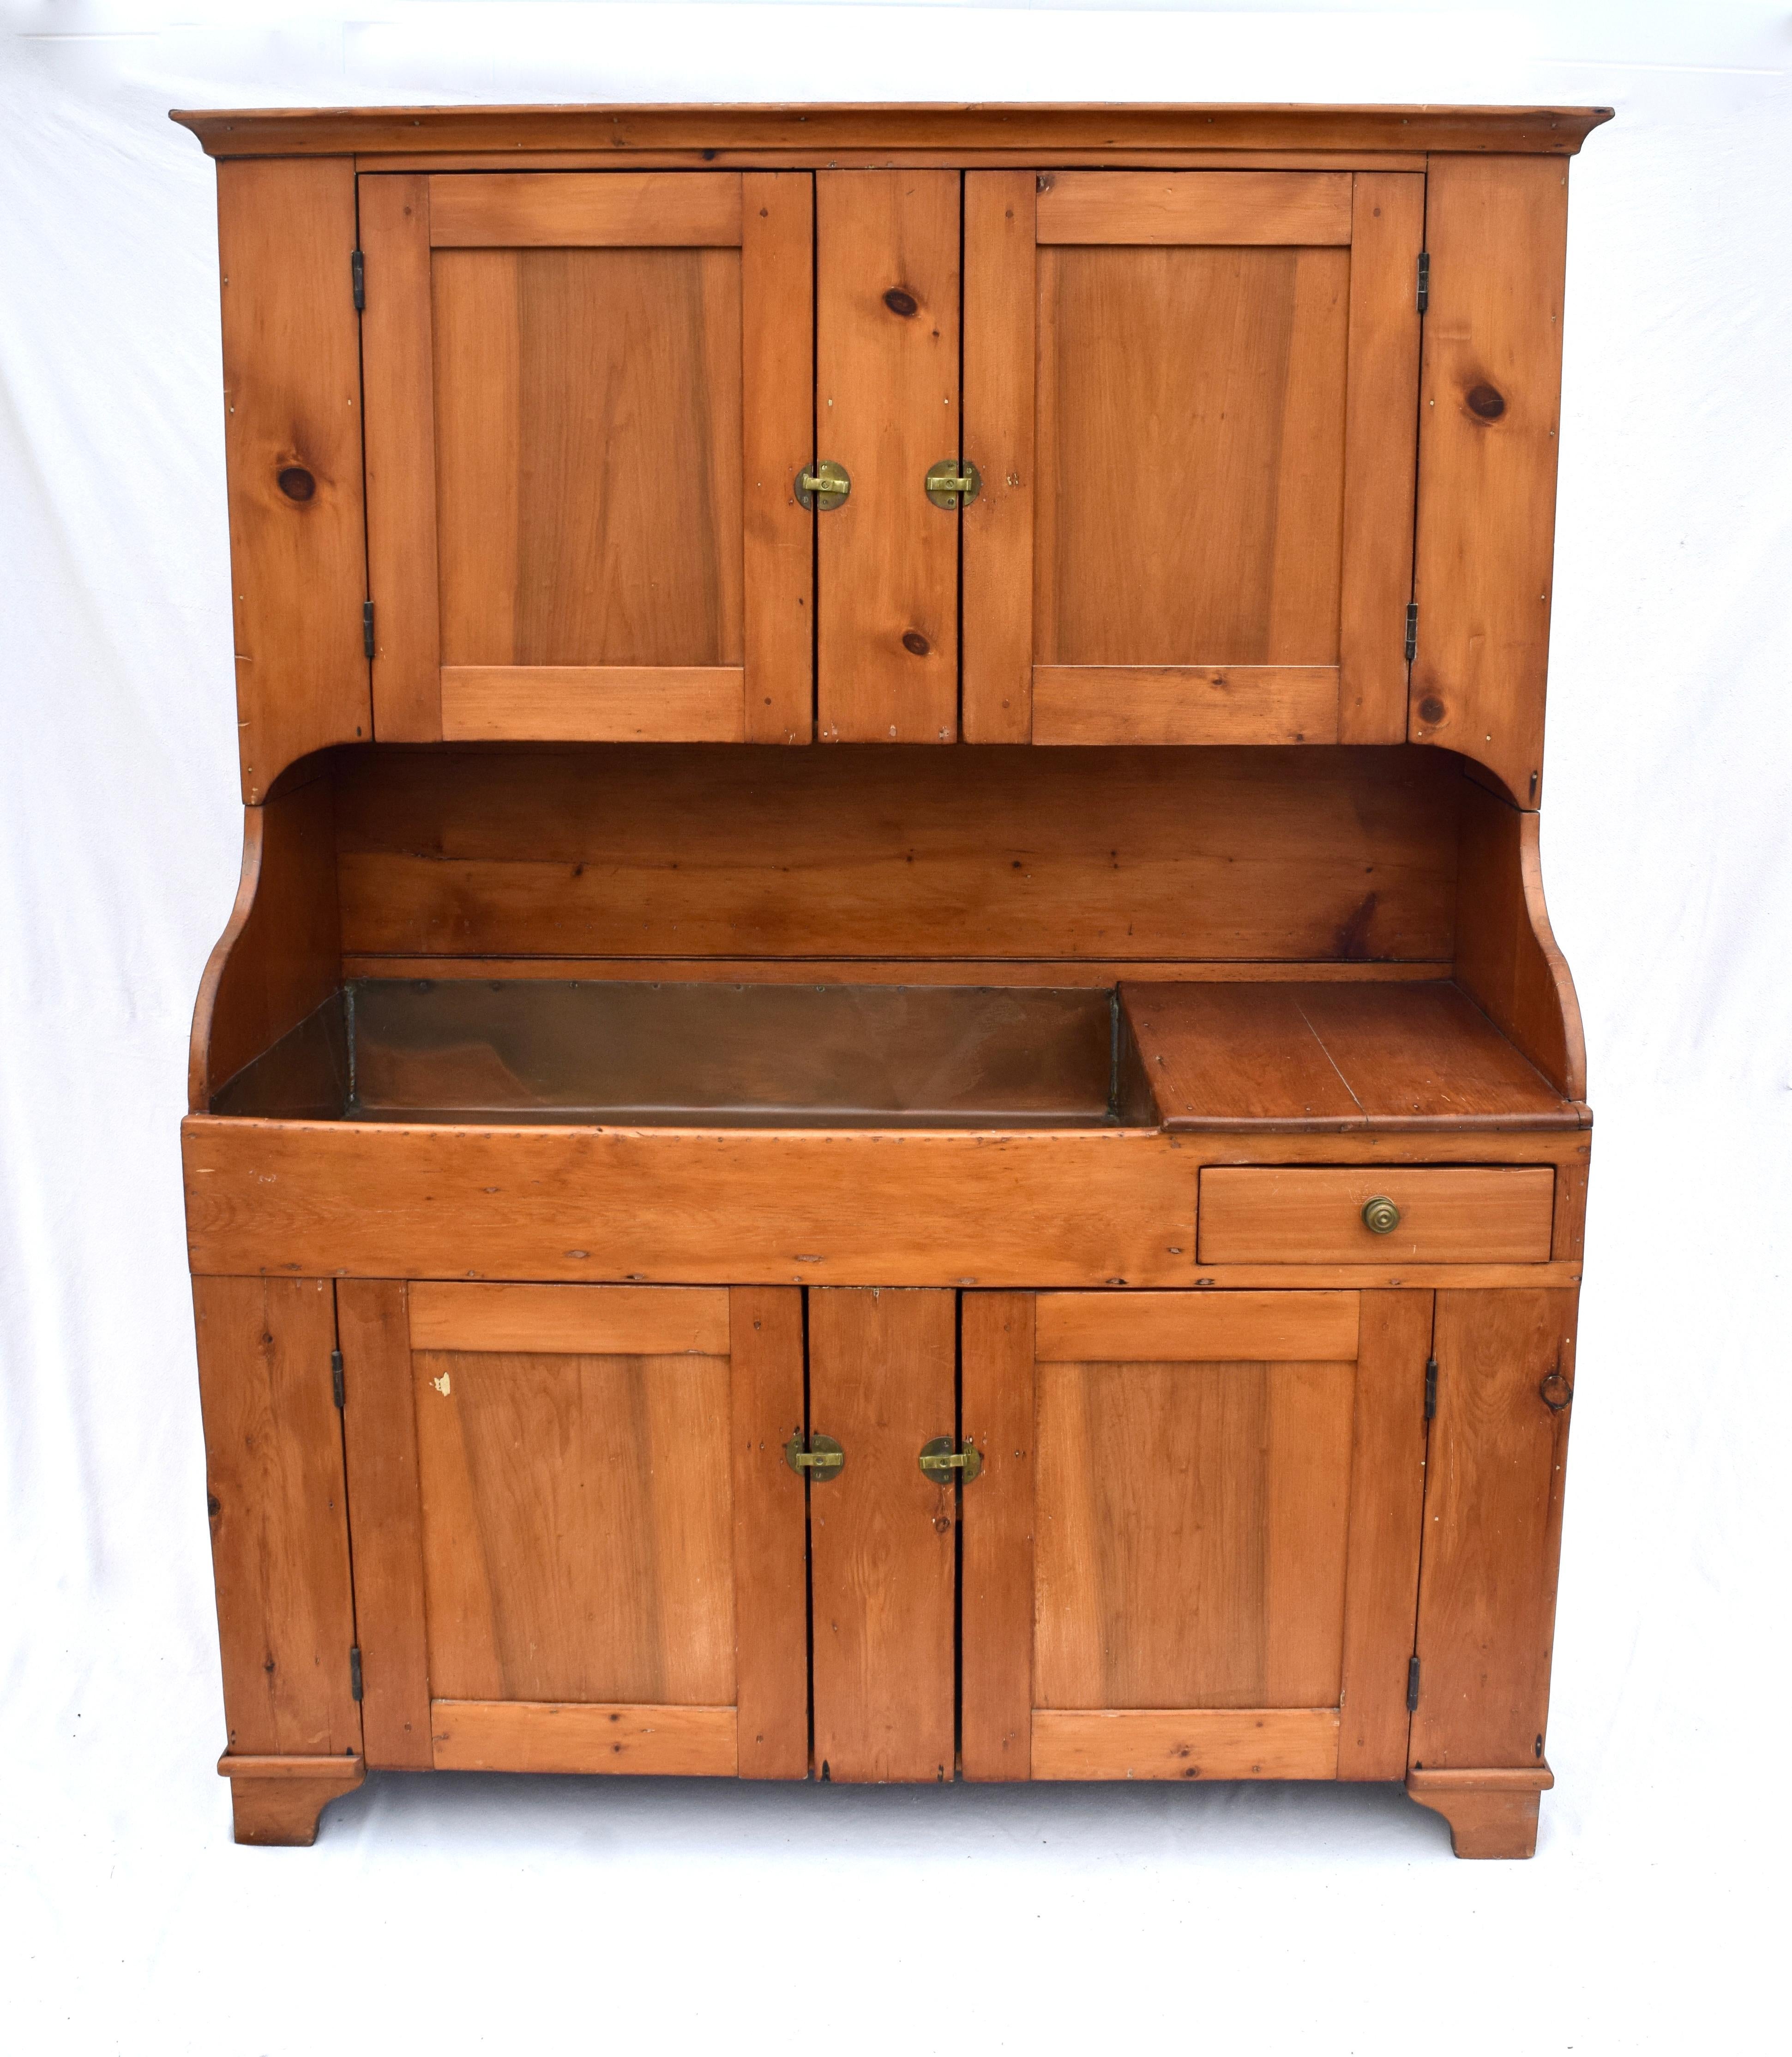 Antique American Pennsylvania step back cupboard with copper lined dry sink, green paint interior, dovetail top section & single dovetailed hand planed drawer. There are two sections each having one single stationary shelf. Unusually generous in